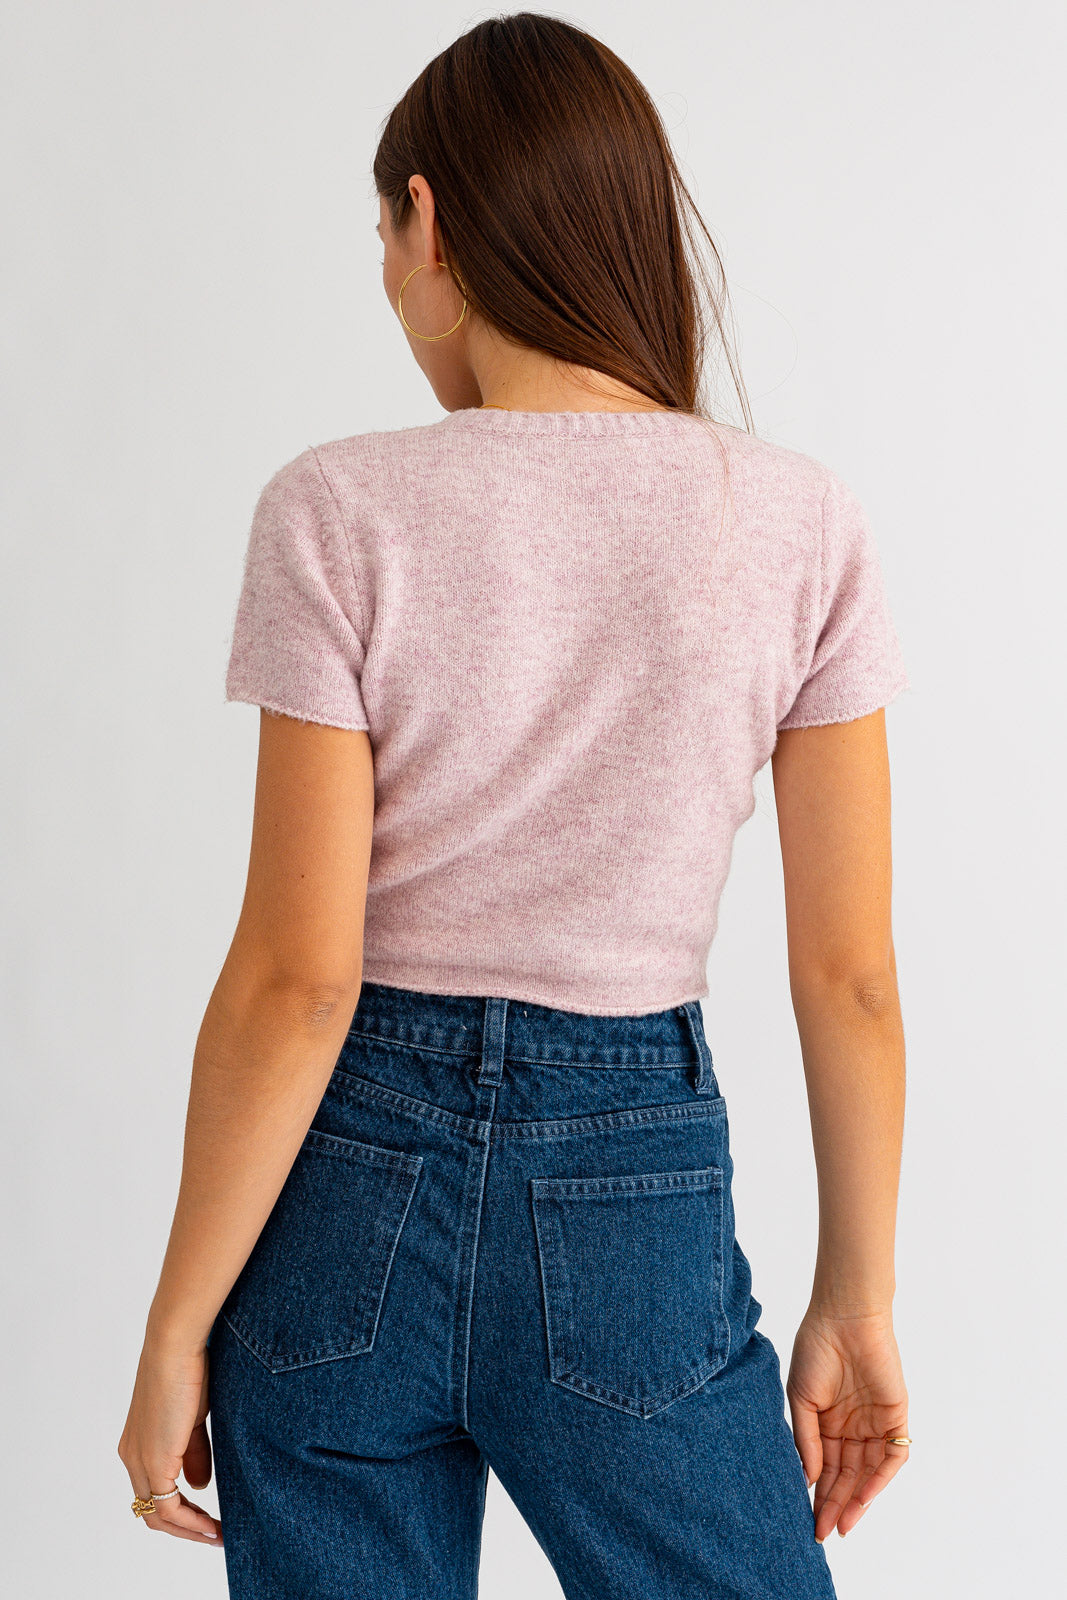 Lt Pink cropped sweater